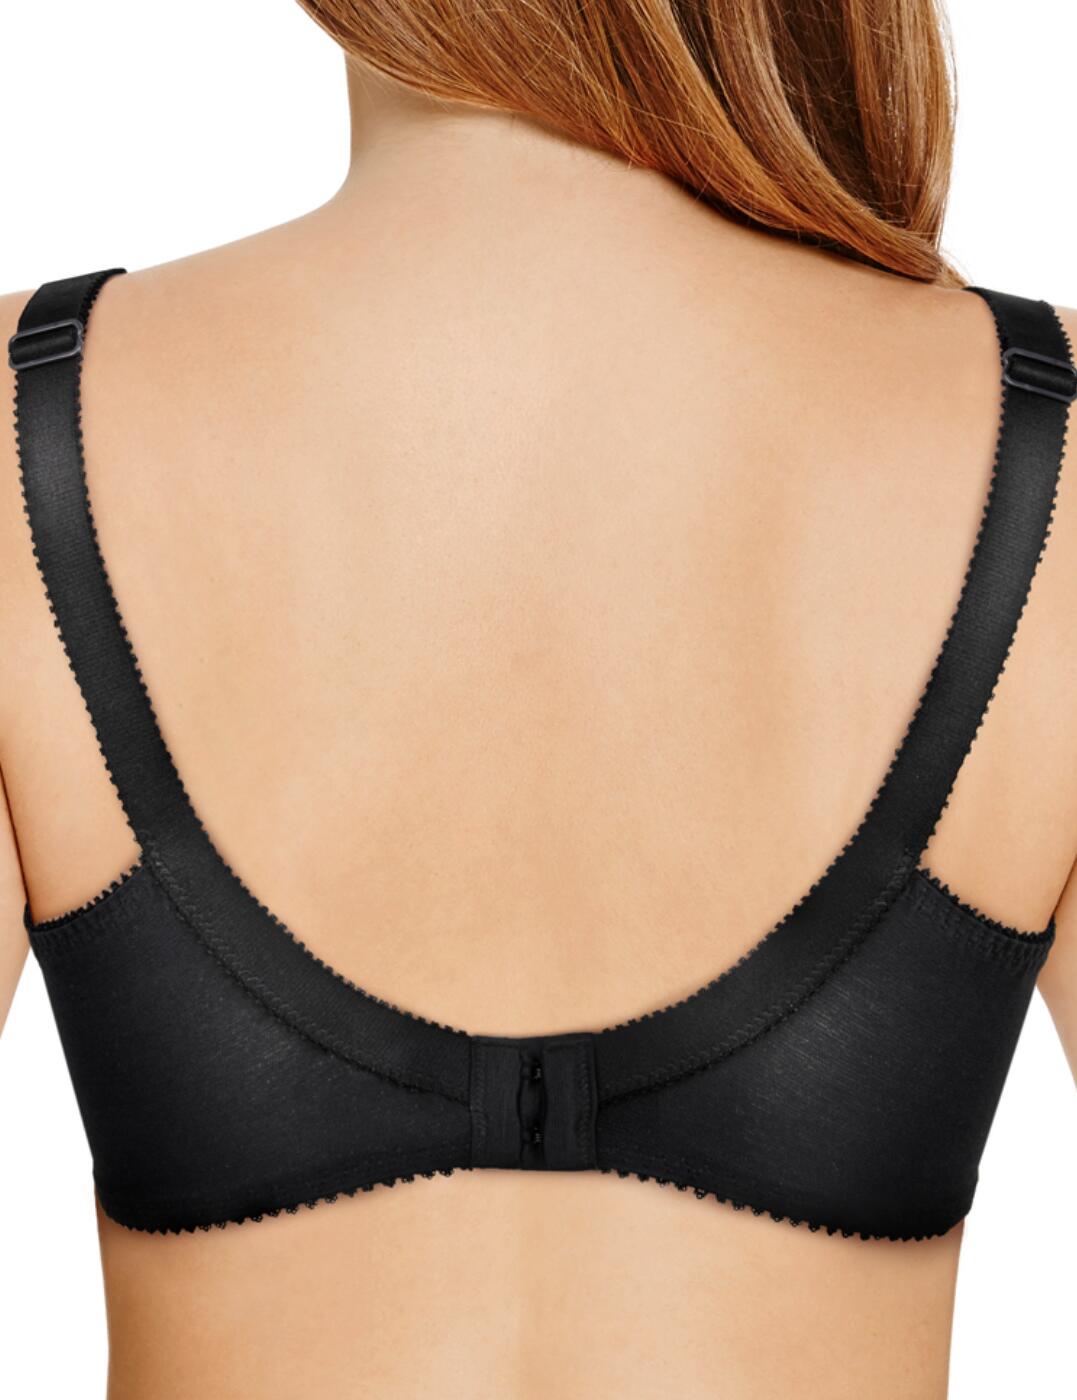 Berlei Total Support Cotton Non-Wired Bra B518 Womens Full Cup